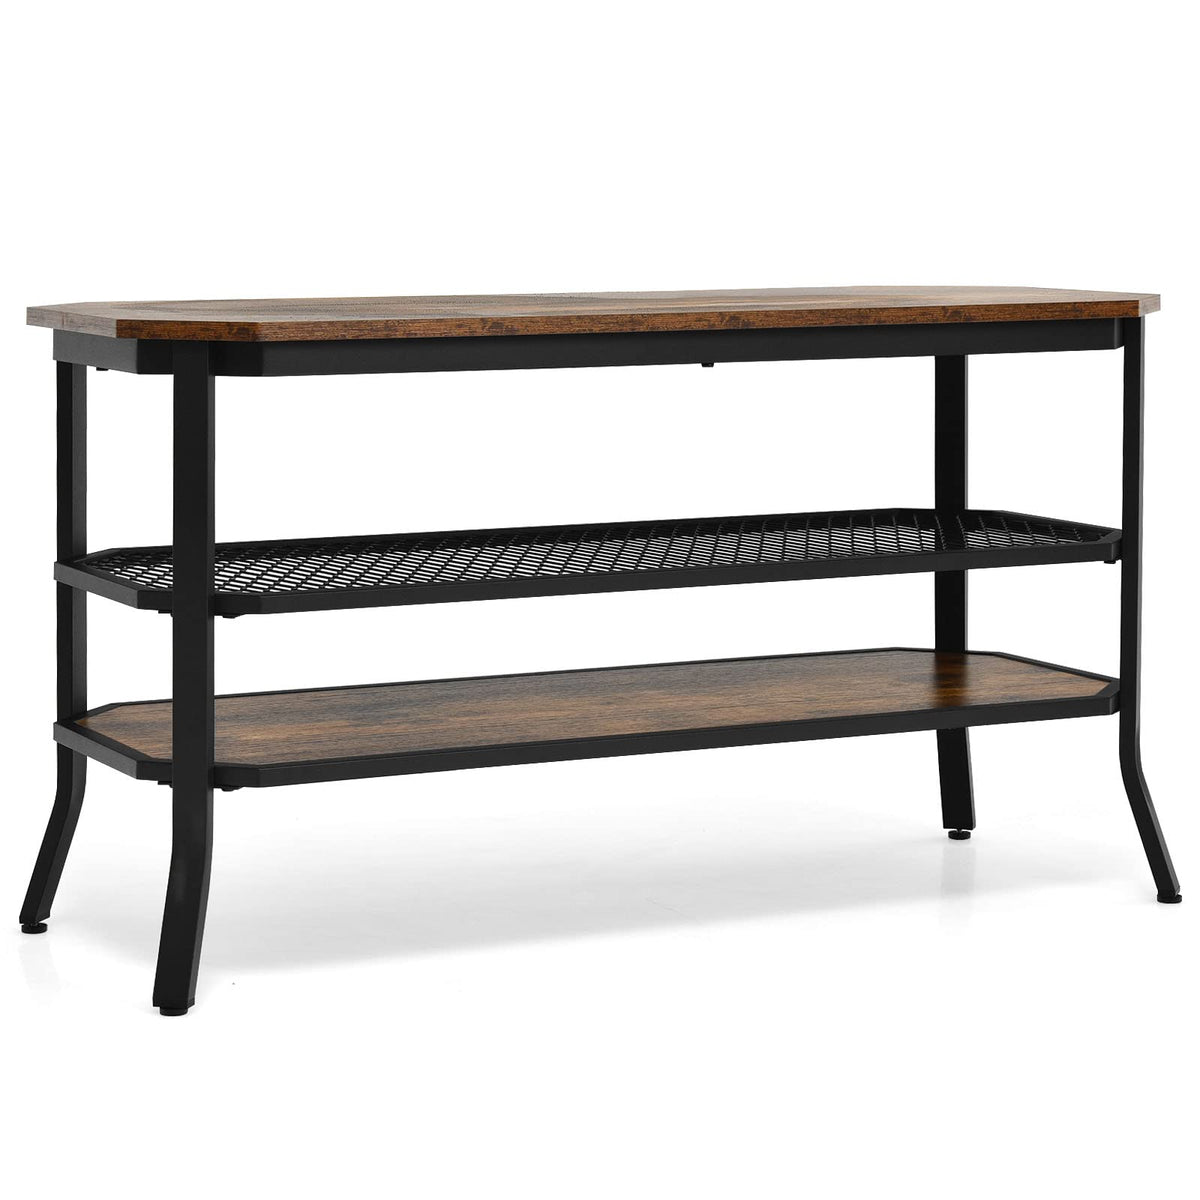 Giantex TV Stand for TVs up to 46”, 3-Tier Console Table w/Metal Frame & Storage Shelves